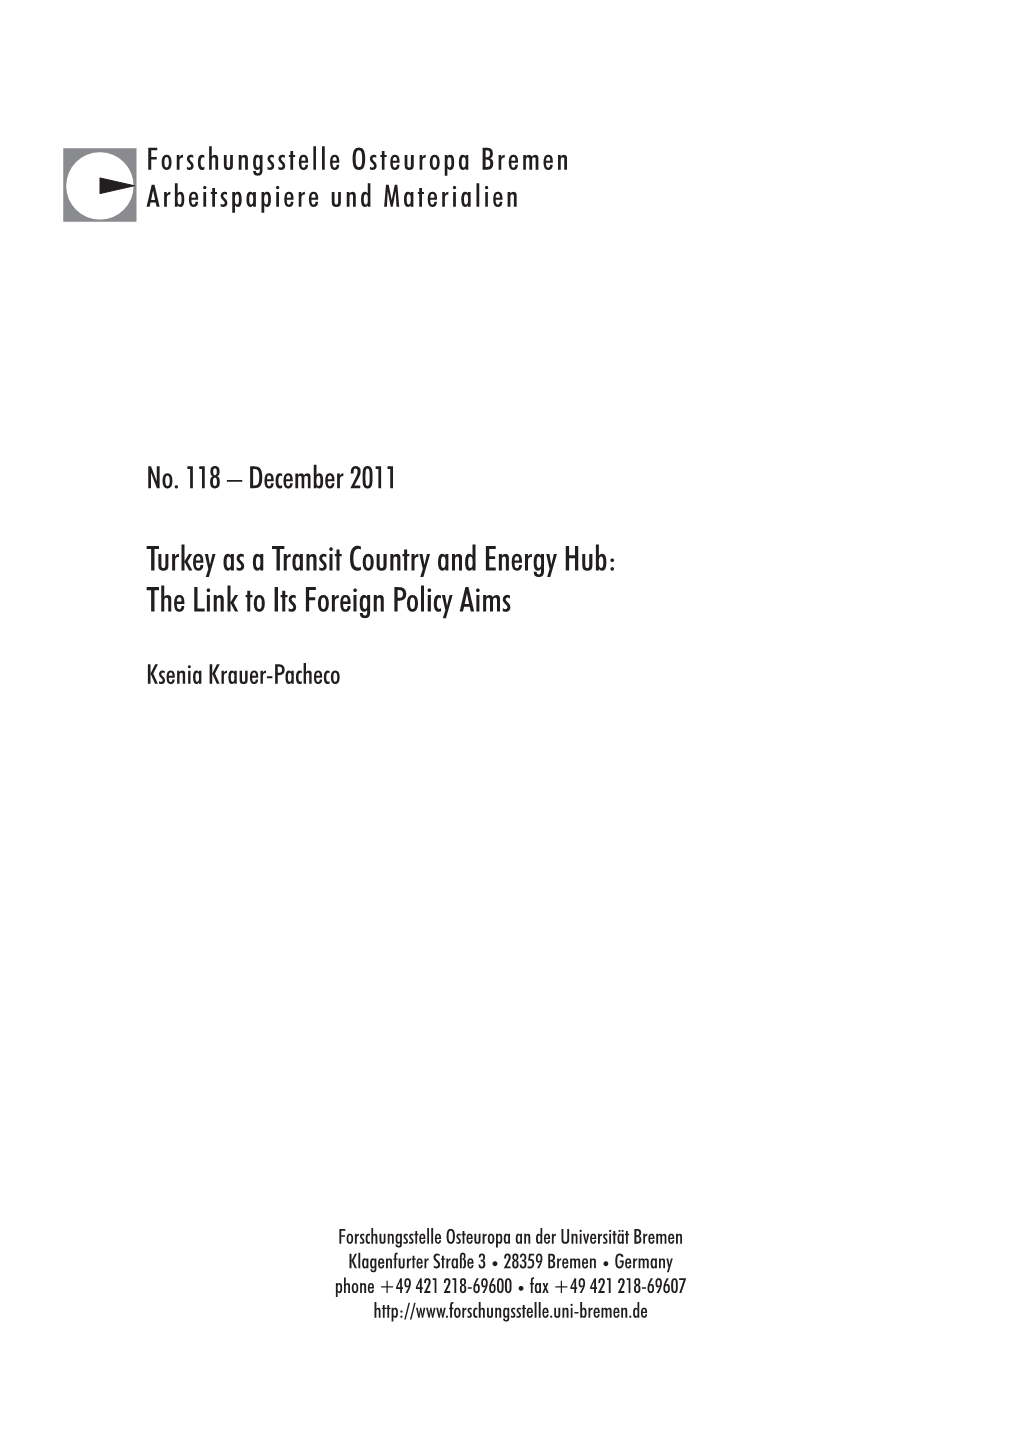 Turkey As a Transit Country and Energy Hub: the Link to Its Foreign Policy Aims